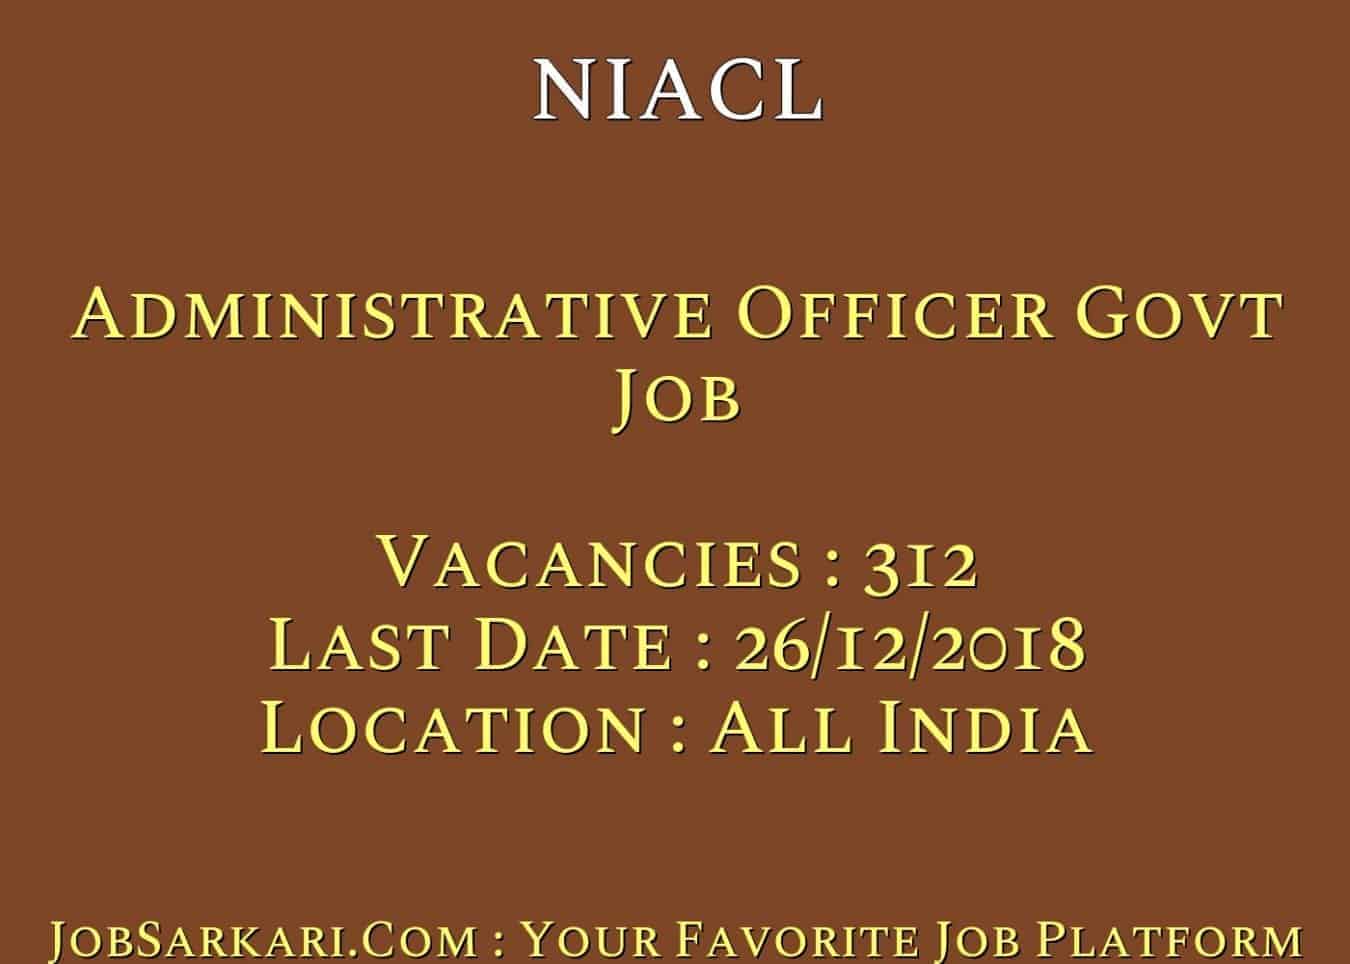 NIACL Recruitment 2018 for Administrative Officer Govt Job